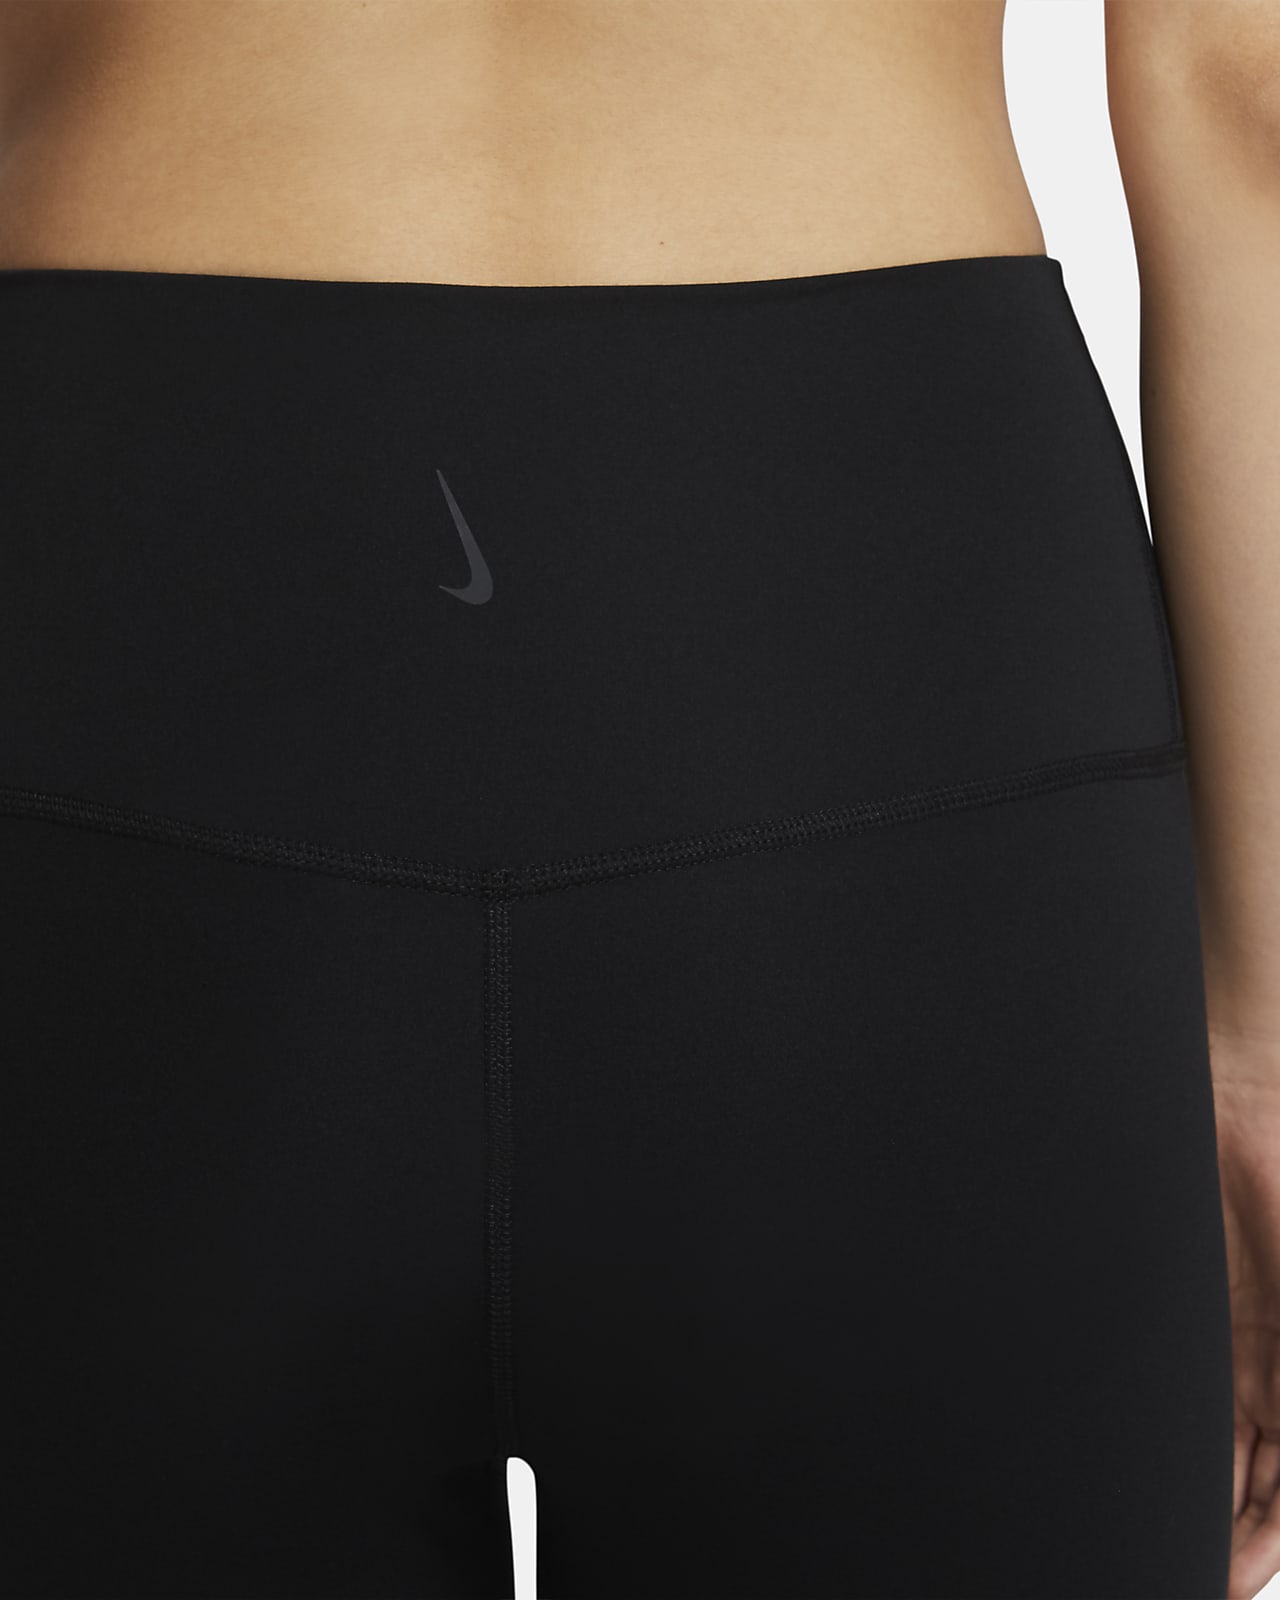 Nike Yoga Luxe Women's High-Waisted 7/8 Tights Plus Size 2X (20W